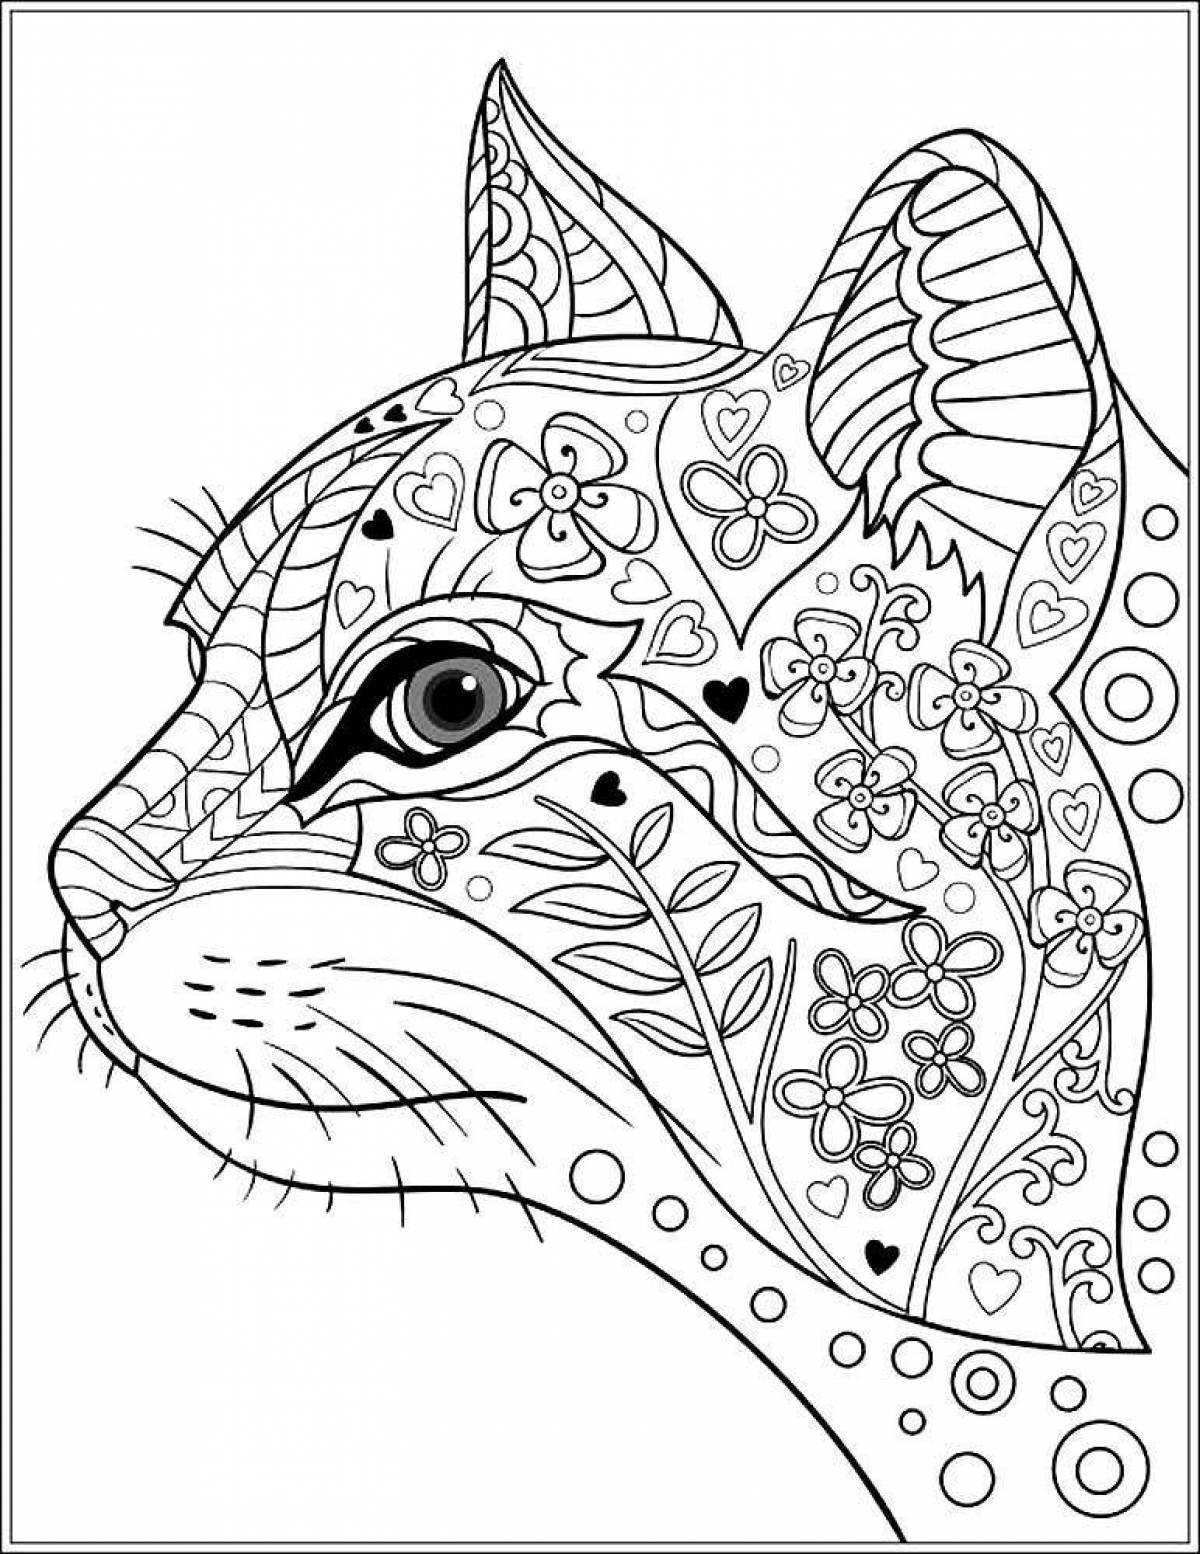 Dazzling coloring for girls 12 years old animals